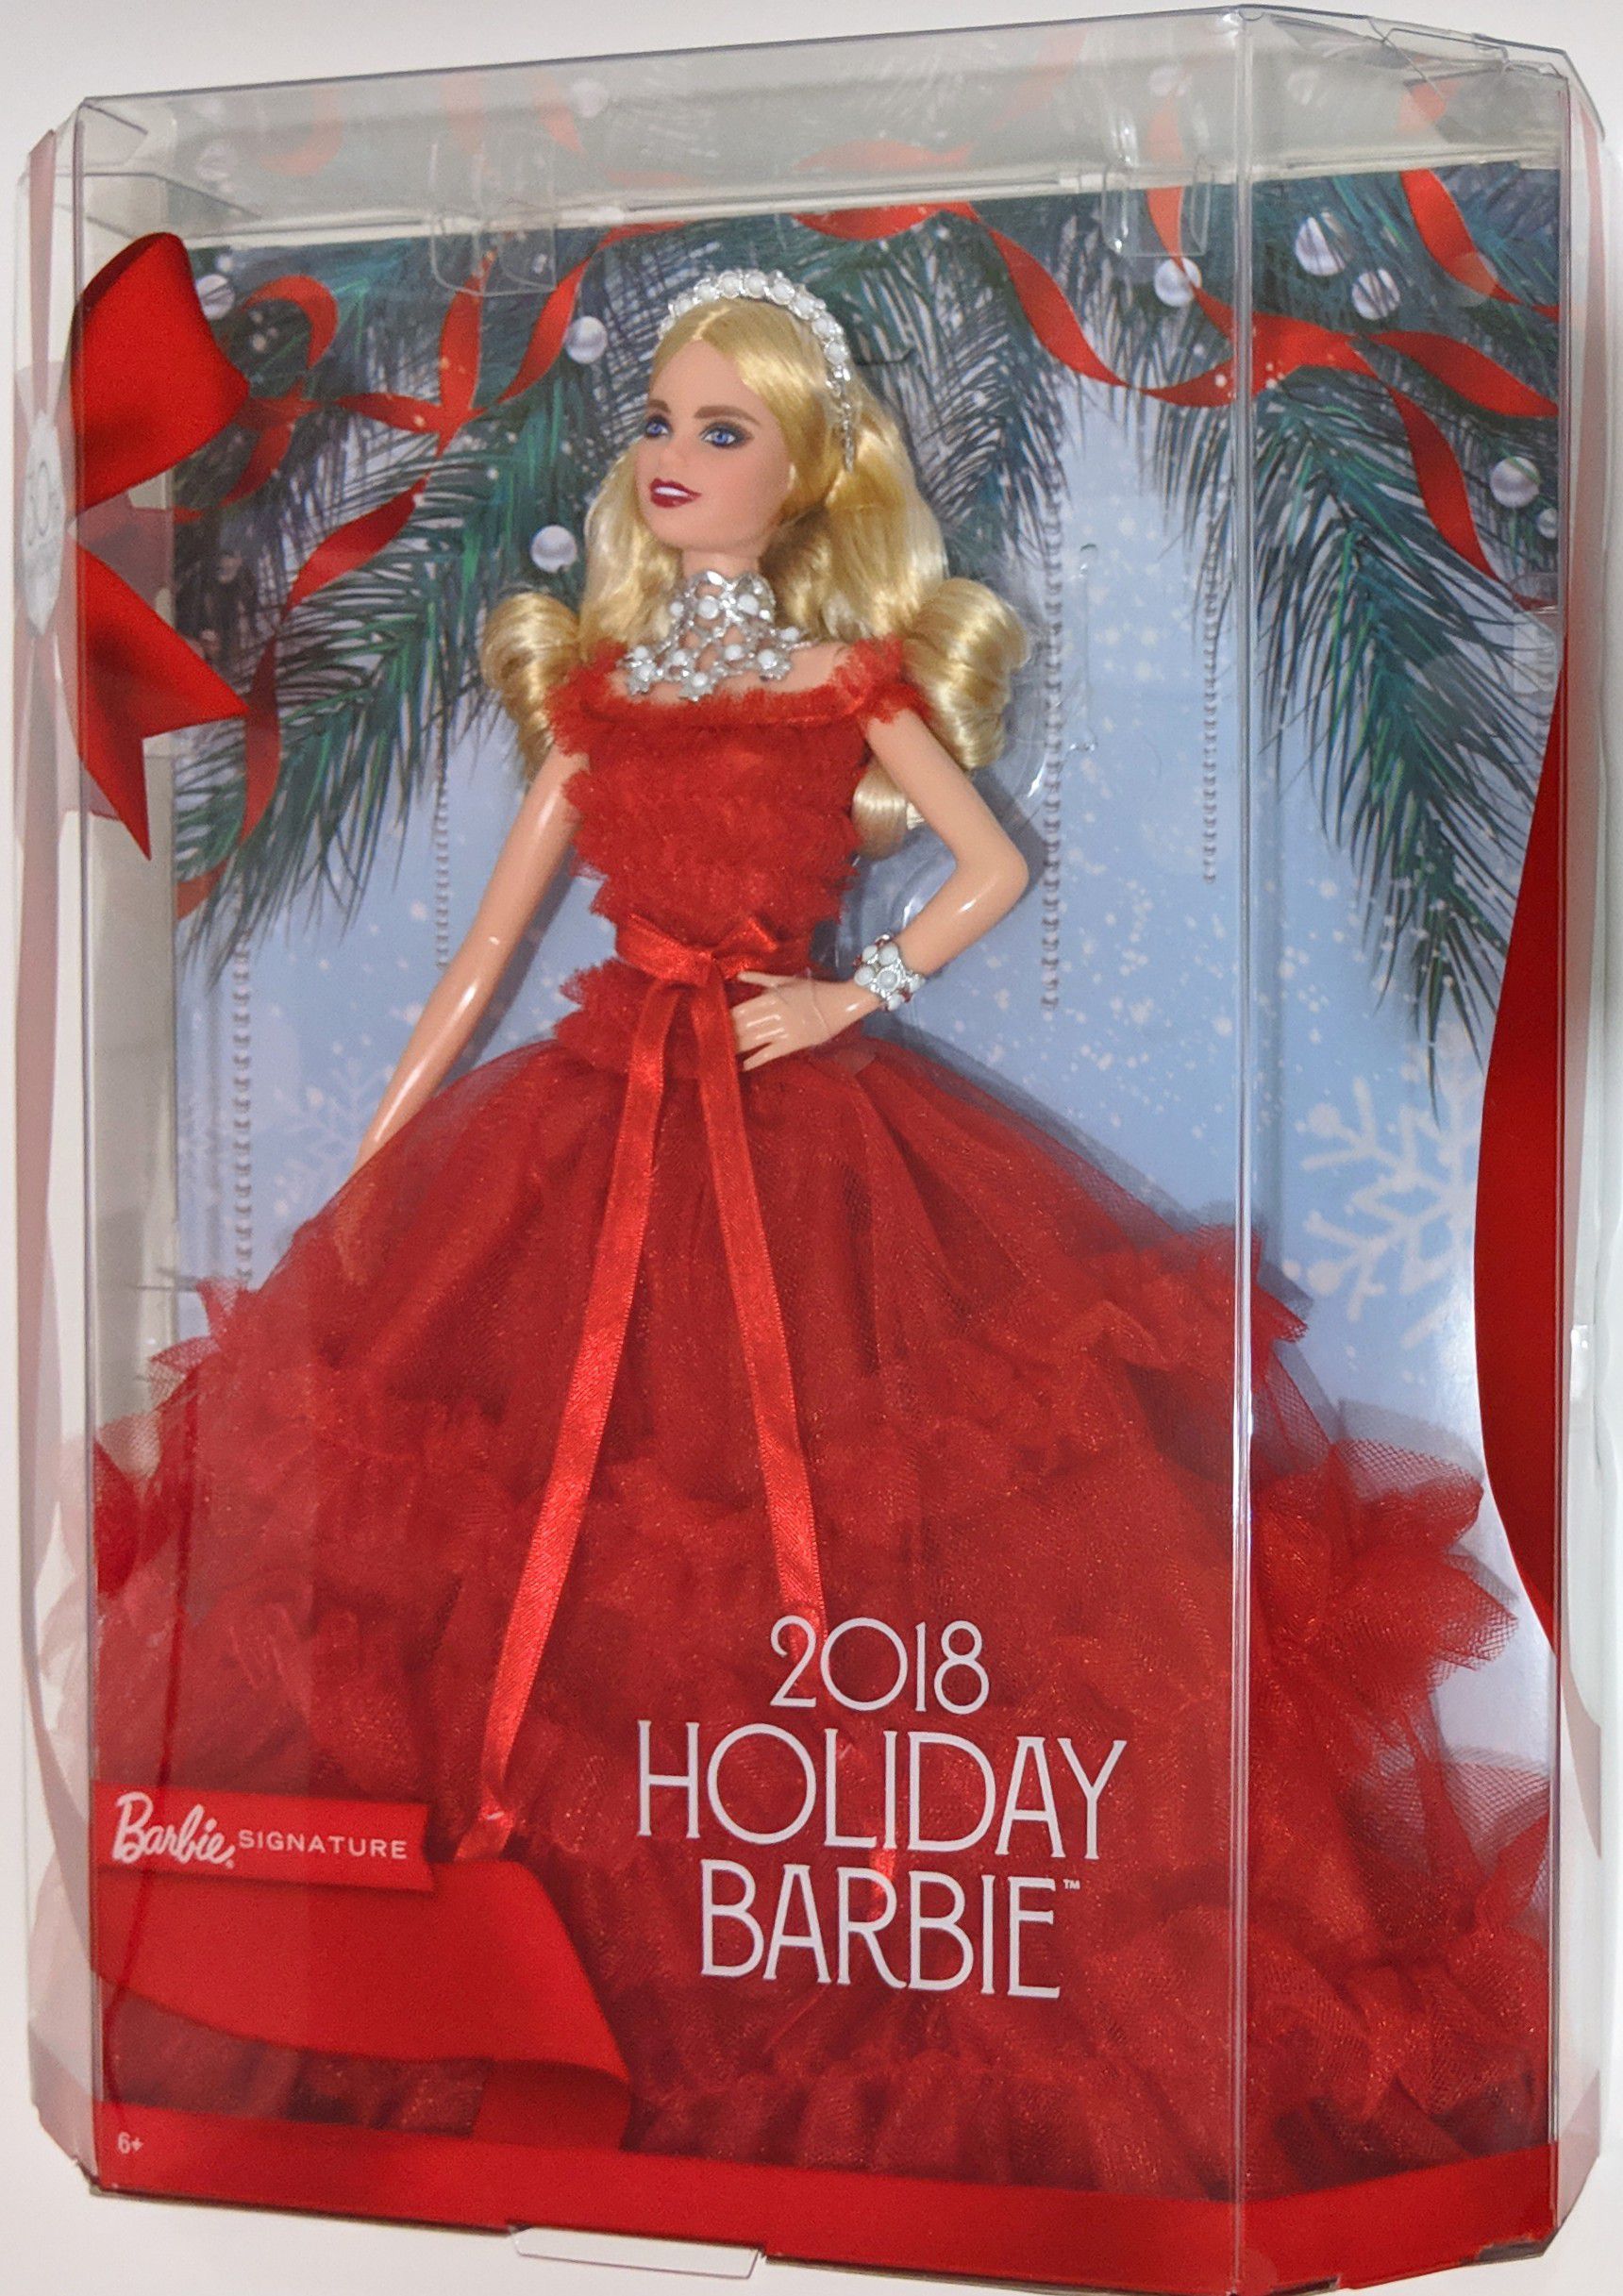 anchor Stem so much Barbie 2018 Holiday Signature Collector Doll - Blonde - 100% Authentic  Mattel for Sale in El Centro, CA - OfferUp